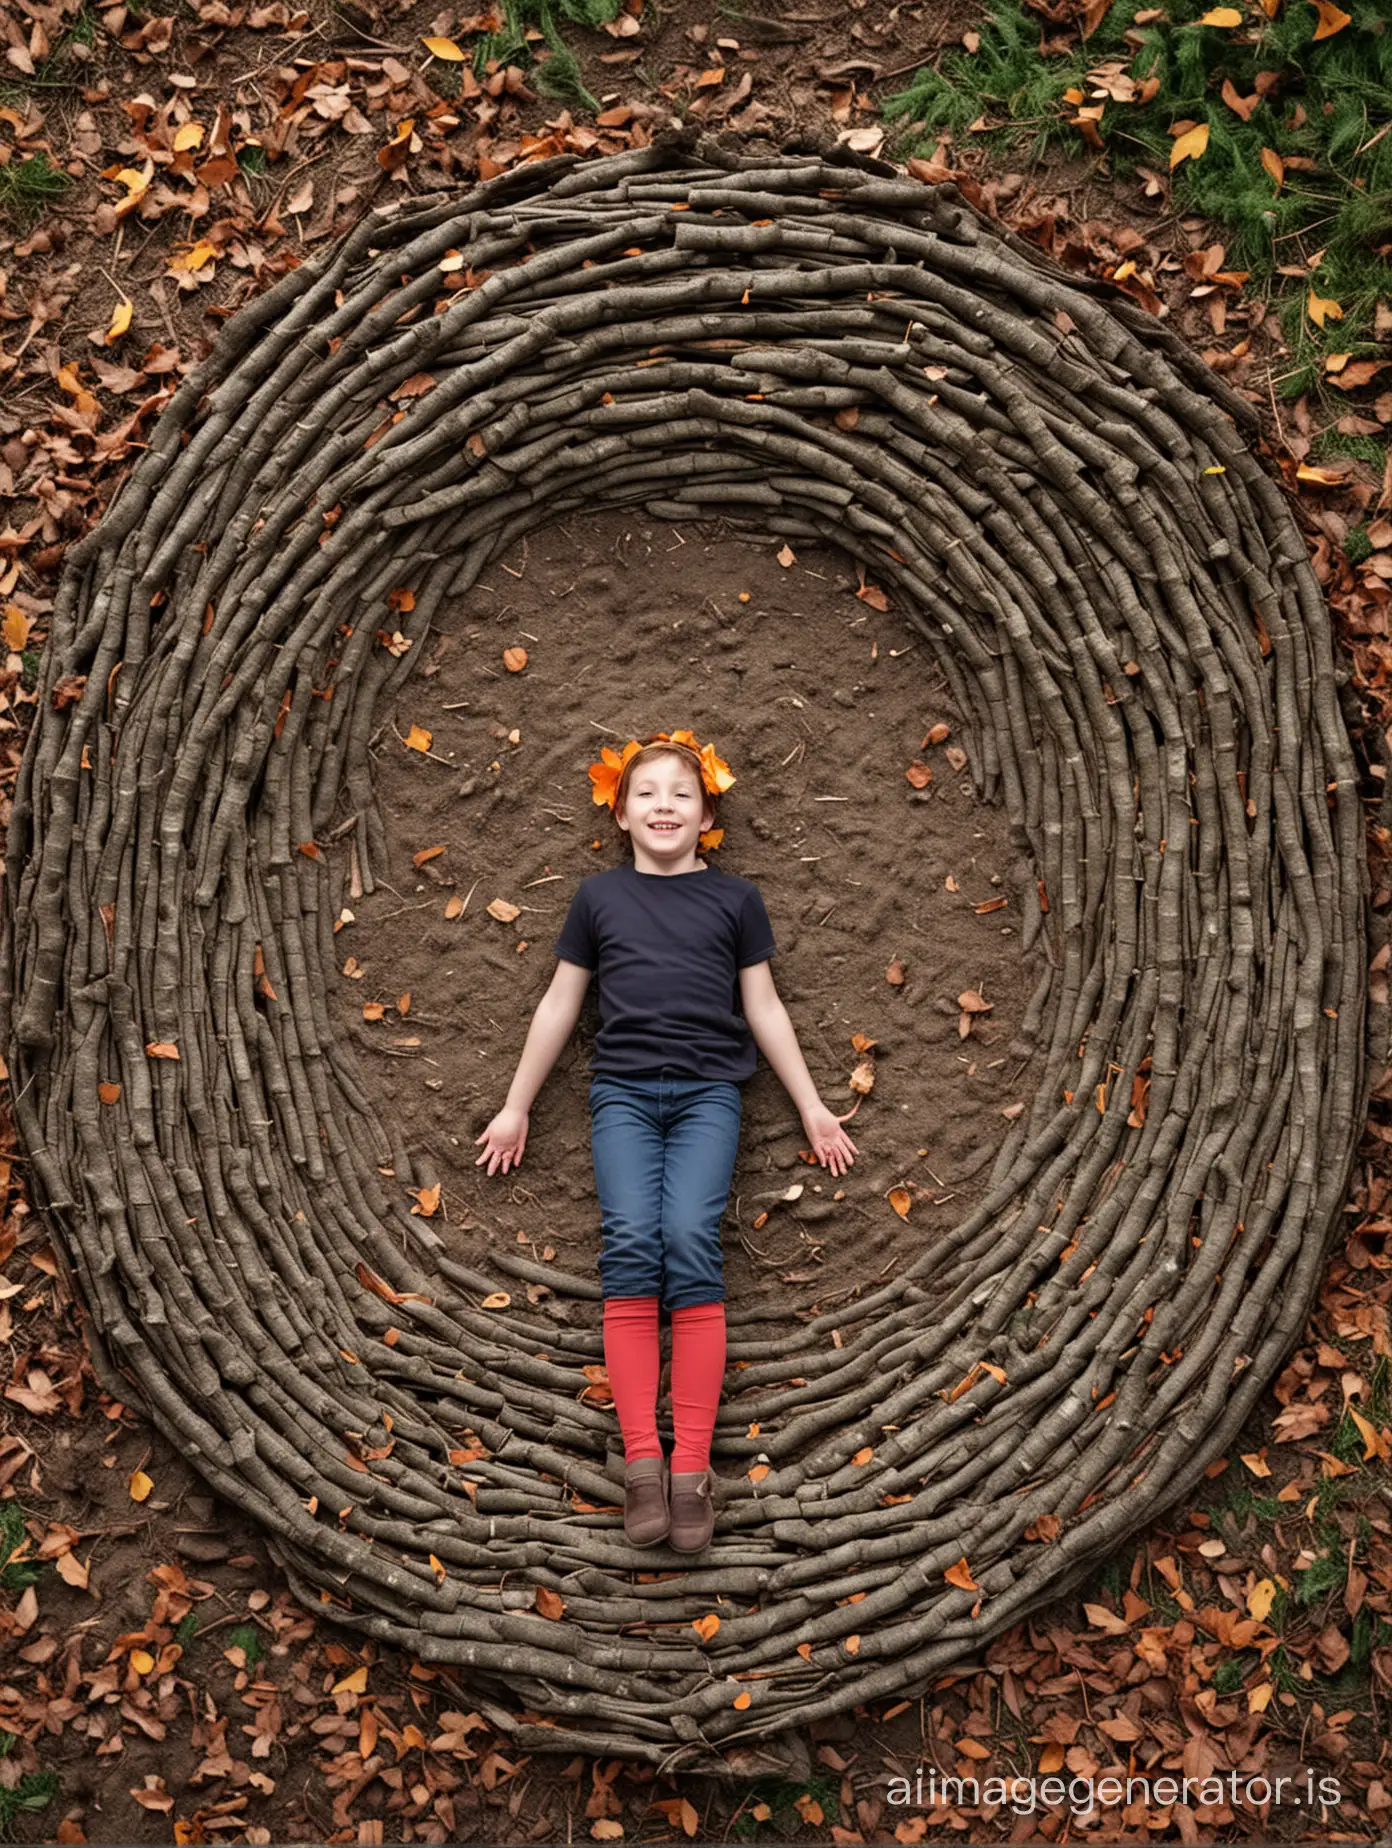 extrovert in the style of Andy Goldsworthy